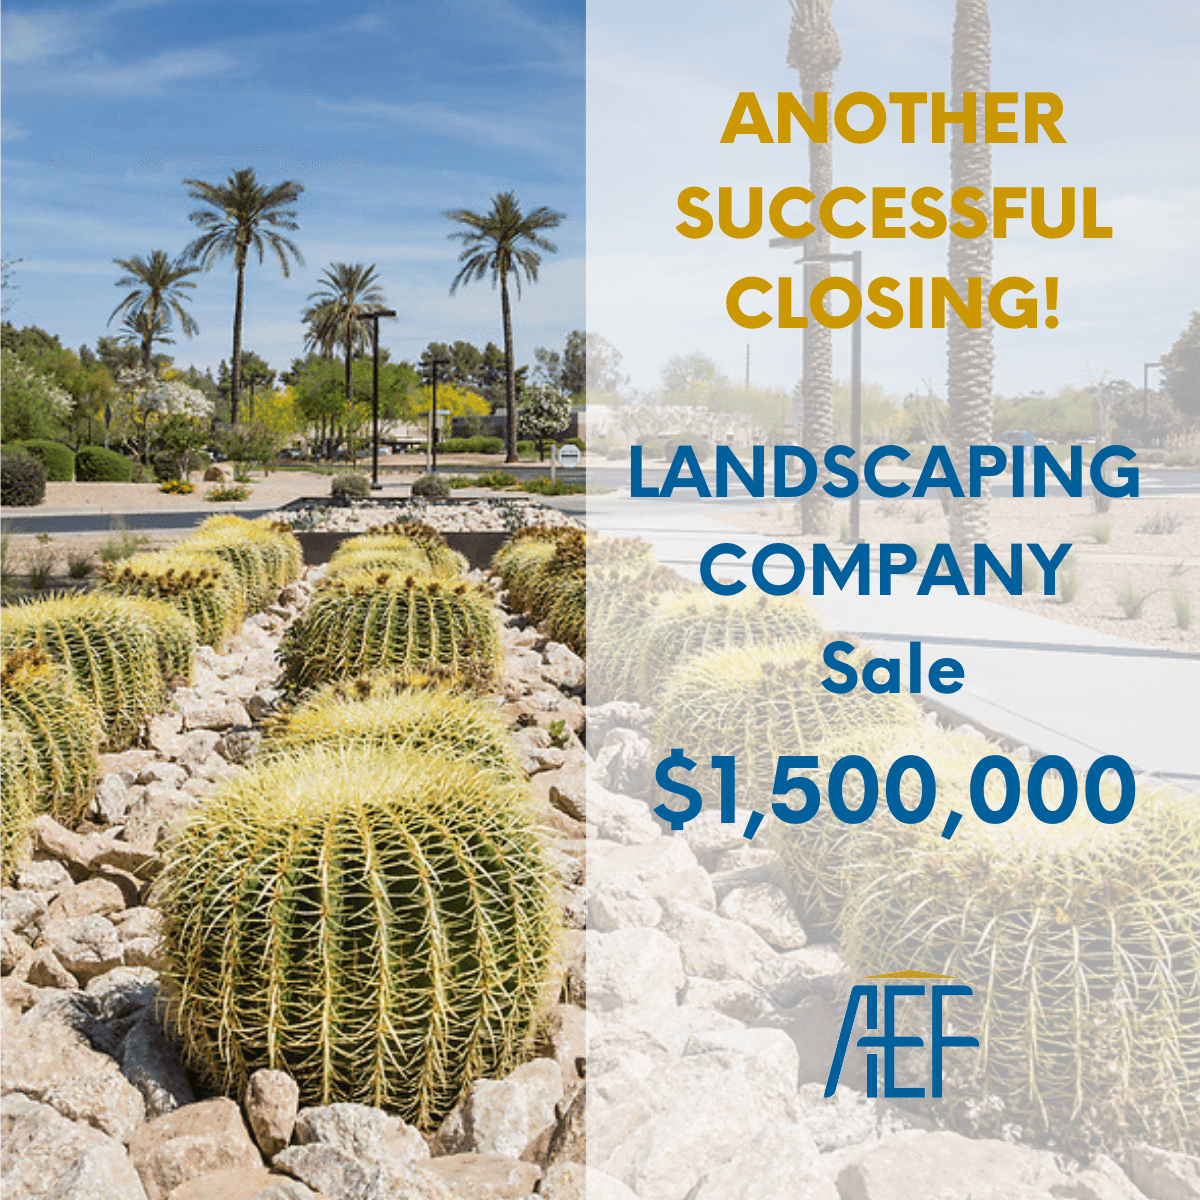 AEF - WINS Landscaping Company